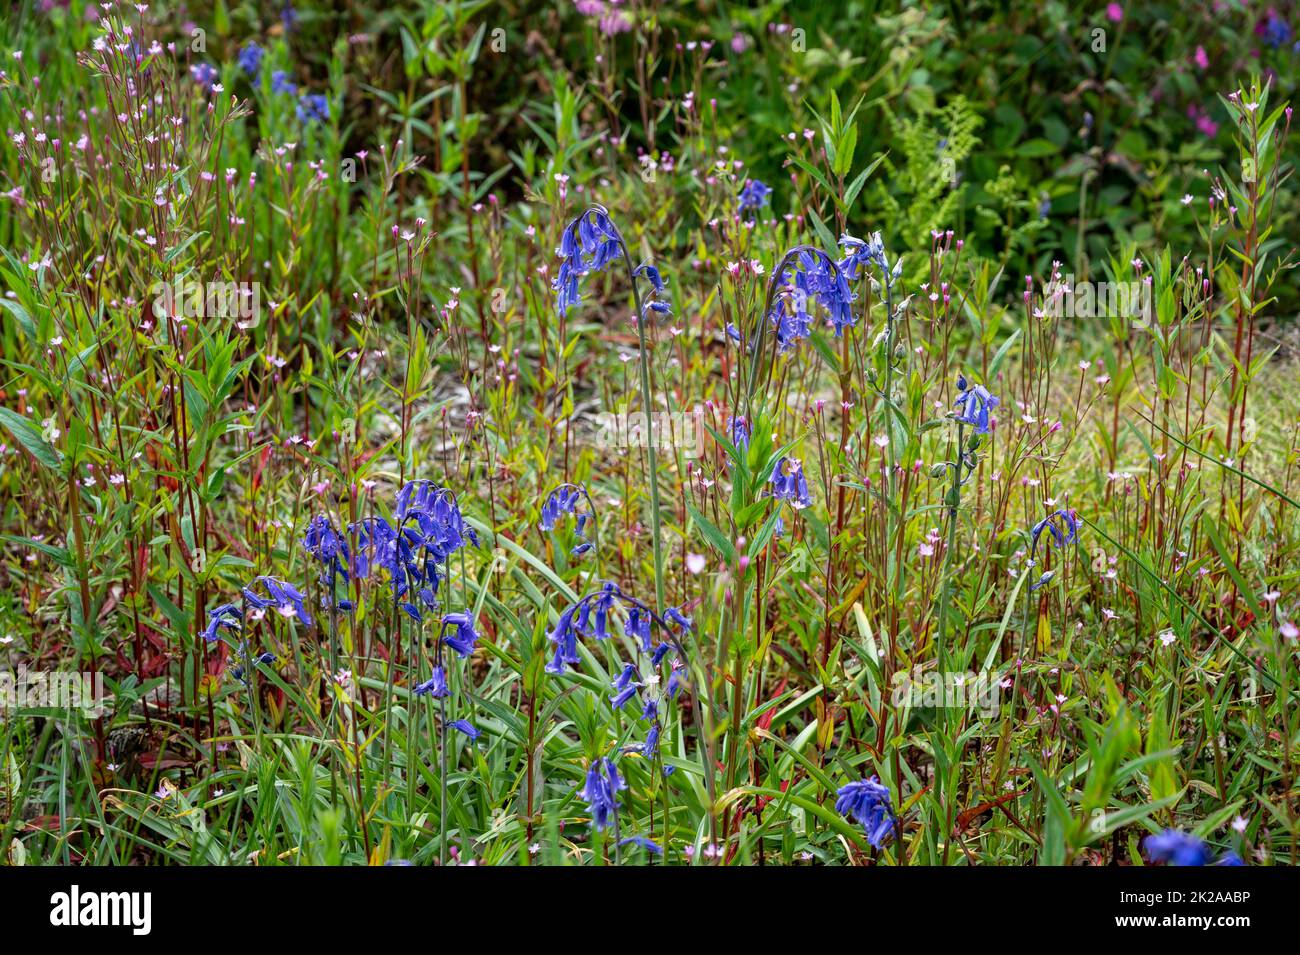 English bluebells mixed with native wild flowers in the grounds of Pencarrow House and gardens, Cornwall, UK. Stock Photo